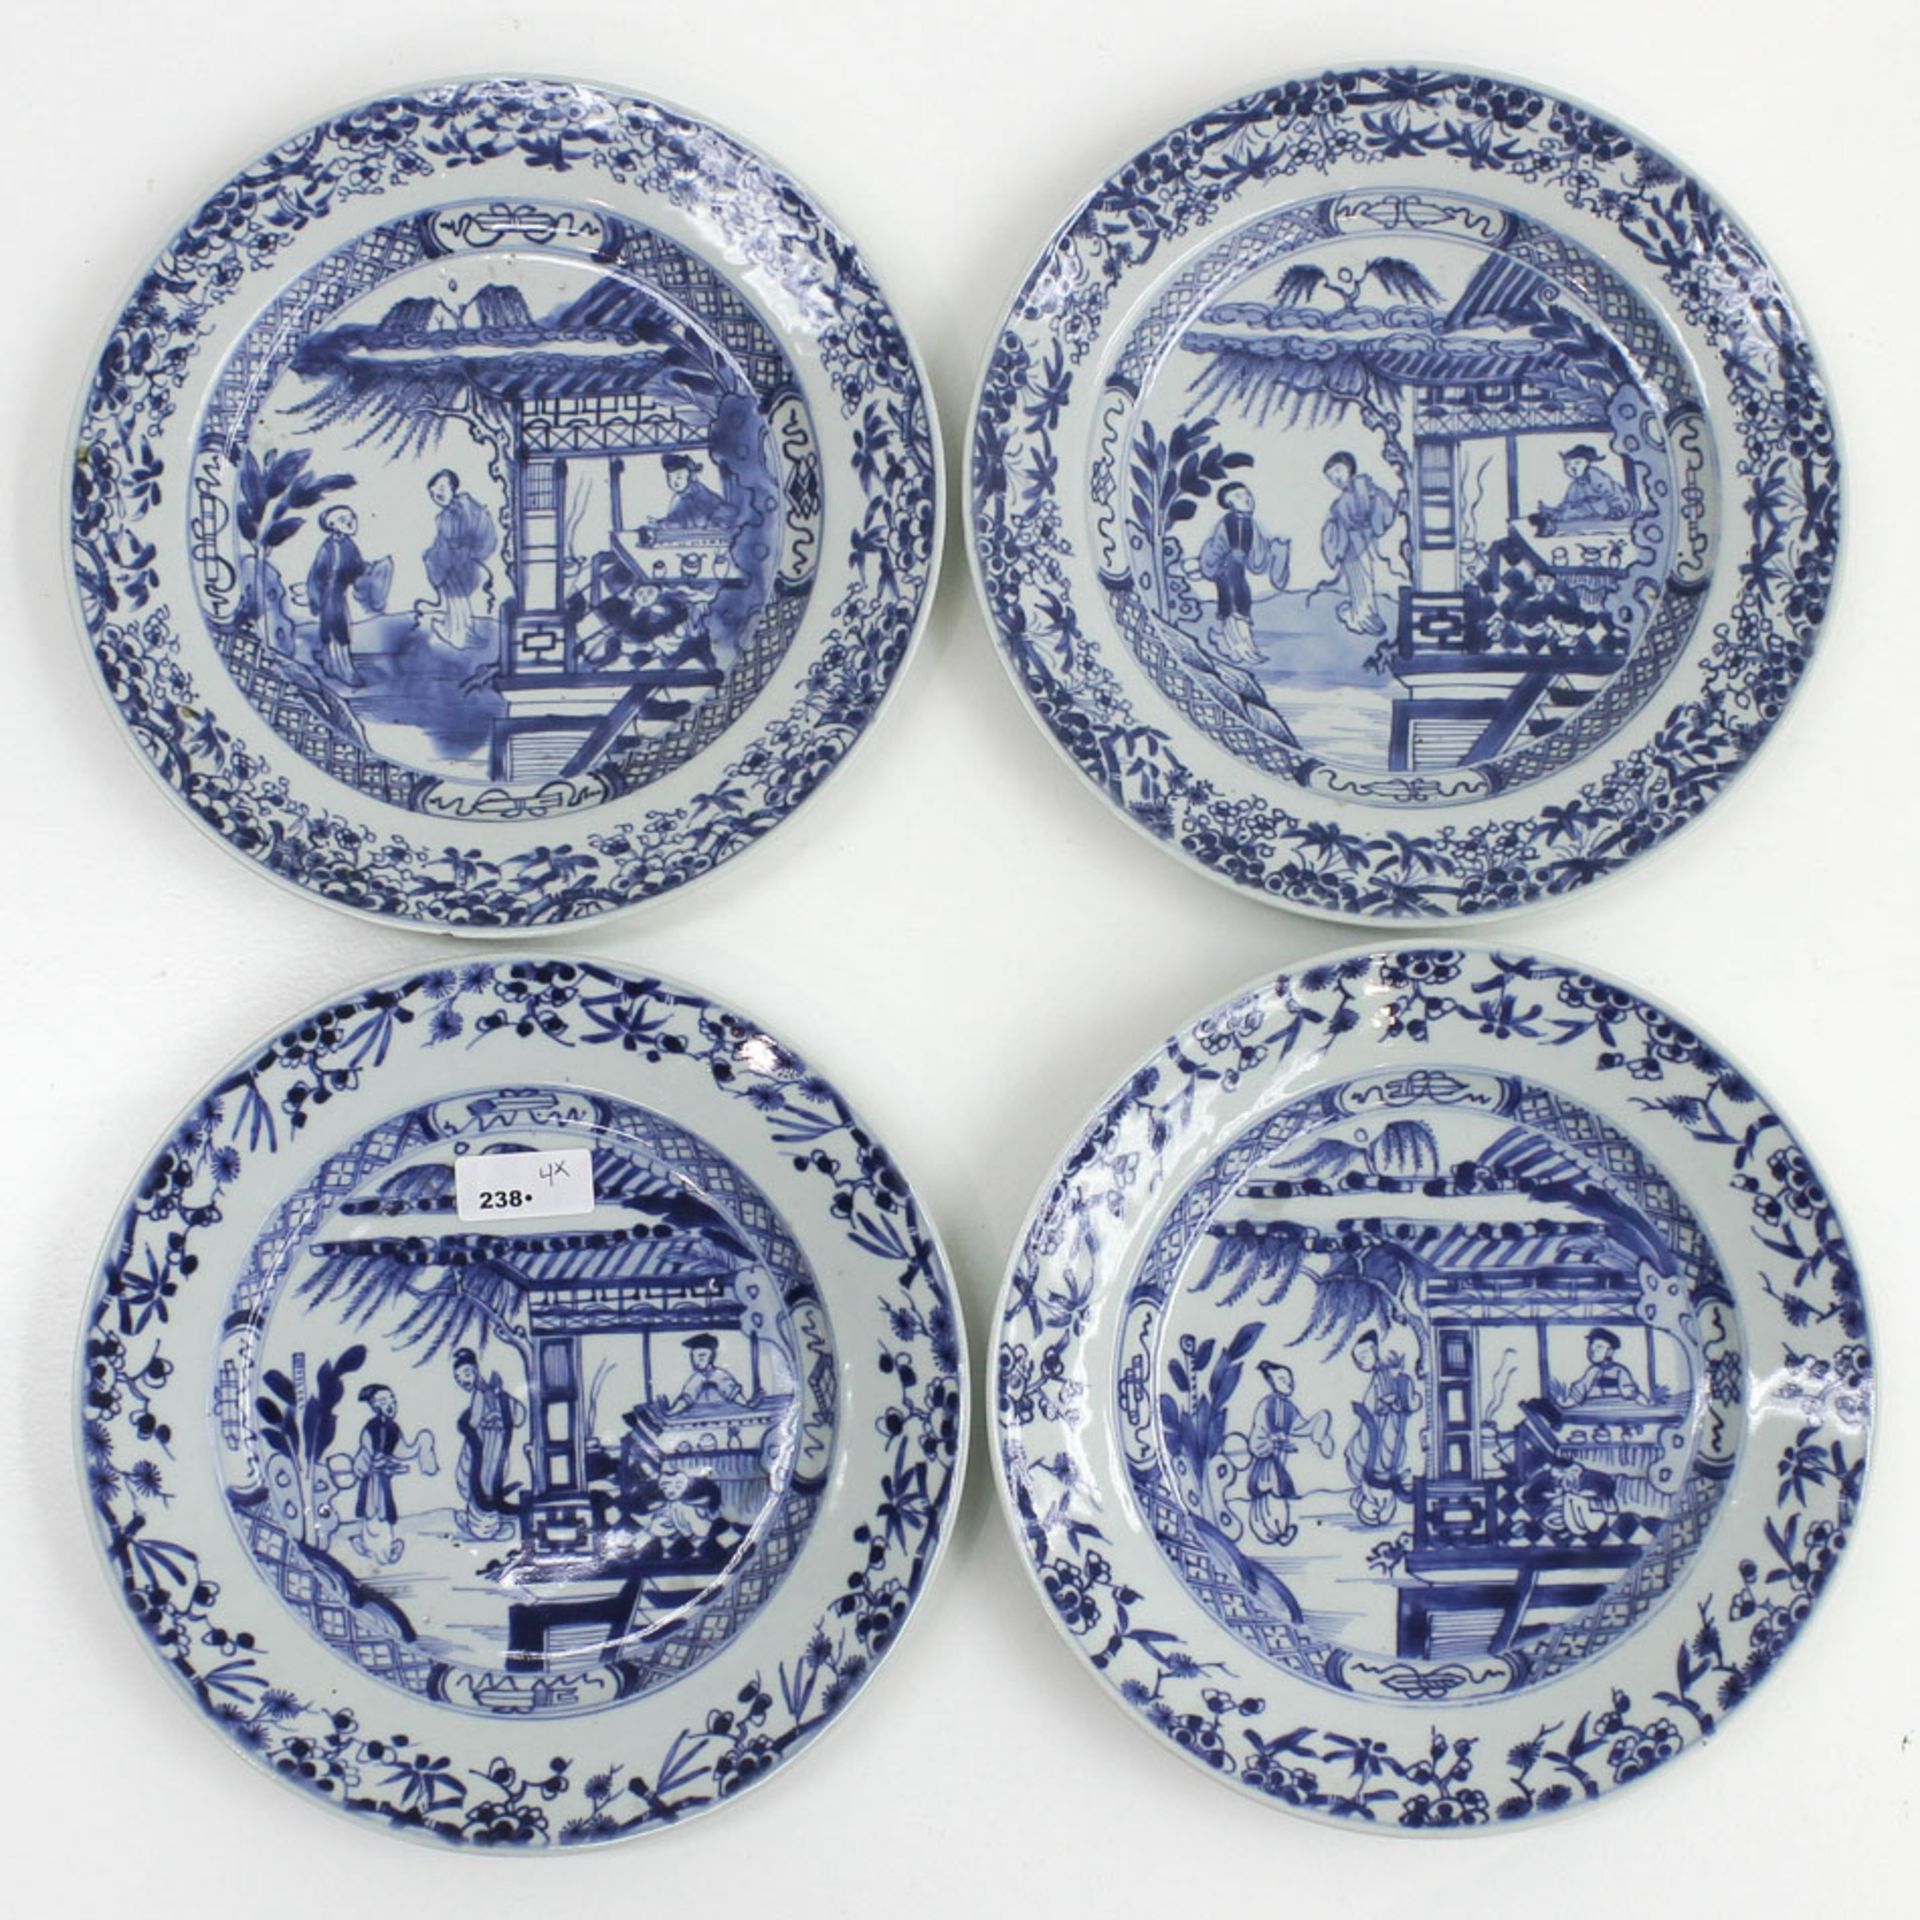 Lot of 4 18th Century Plates Blue and white decor depicting Chinese ladies in gardens with floral